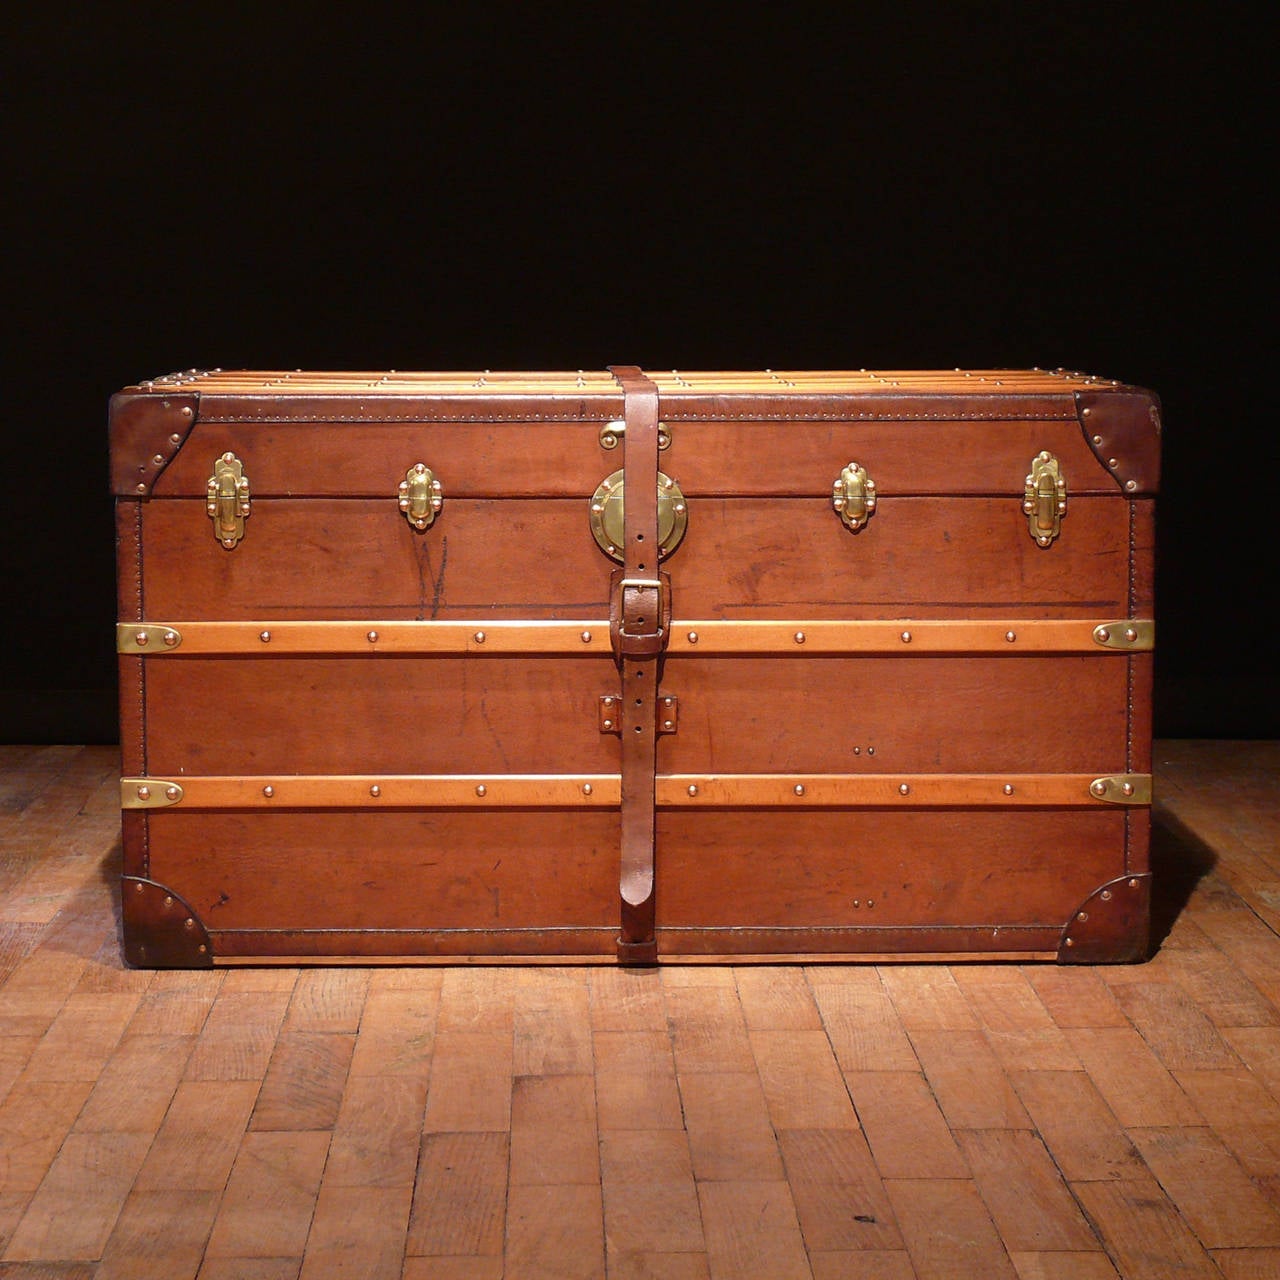 A marvellous leather covered trunk with brass fittings, original leather strap and original interior, by Hofmann of Karlsbad when it was part of the Austro-Hungarian Empire, circa 1895. The trunk is of exceptional quality; in the realms of Louis